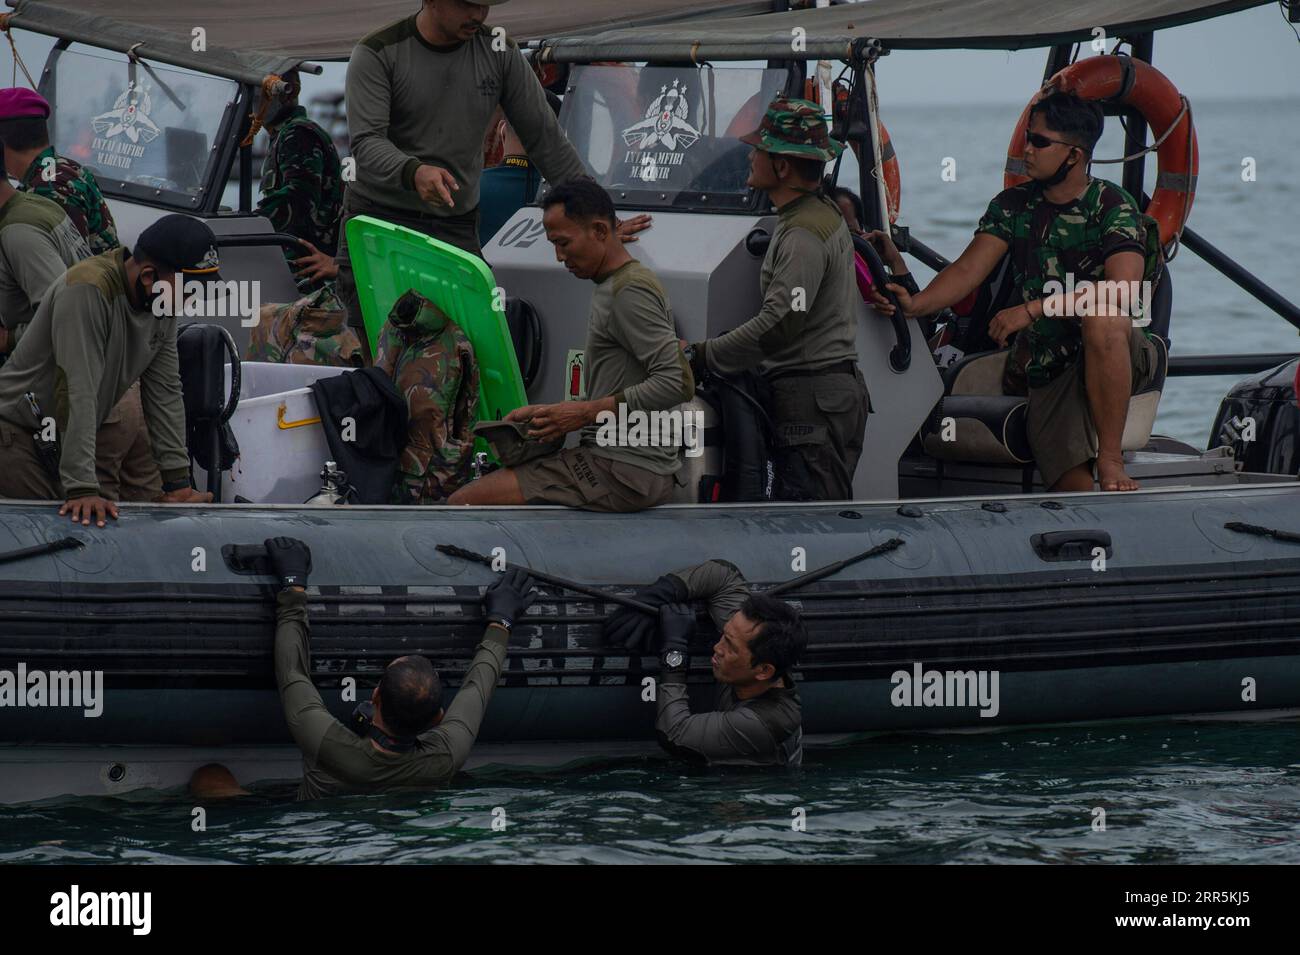 210110 -- LANCANG ISLAND, Jan. 10, 2021 -- Navy special force conducts a search operation at the plane crash site of the Sriwijaya Air flight SJ-182 in the waters of Lancang Island, north of Jakarta, Indonesia, Jan. 10, 2021. Indonesian authorities said on Sunday that they have found body parts and stuffs suspected to belong to passengers of Indonesia s Sriwijaya Air plane that crashed into waters off Jakarta. Ships and aircraft from various Indonesian agencies have been involved in the search for the Boeing 737-500 plane which crashed shortly after takeoff with 62 people aboard on Saturday. Stock Photo